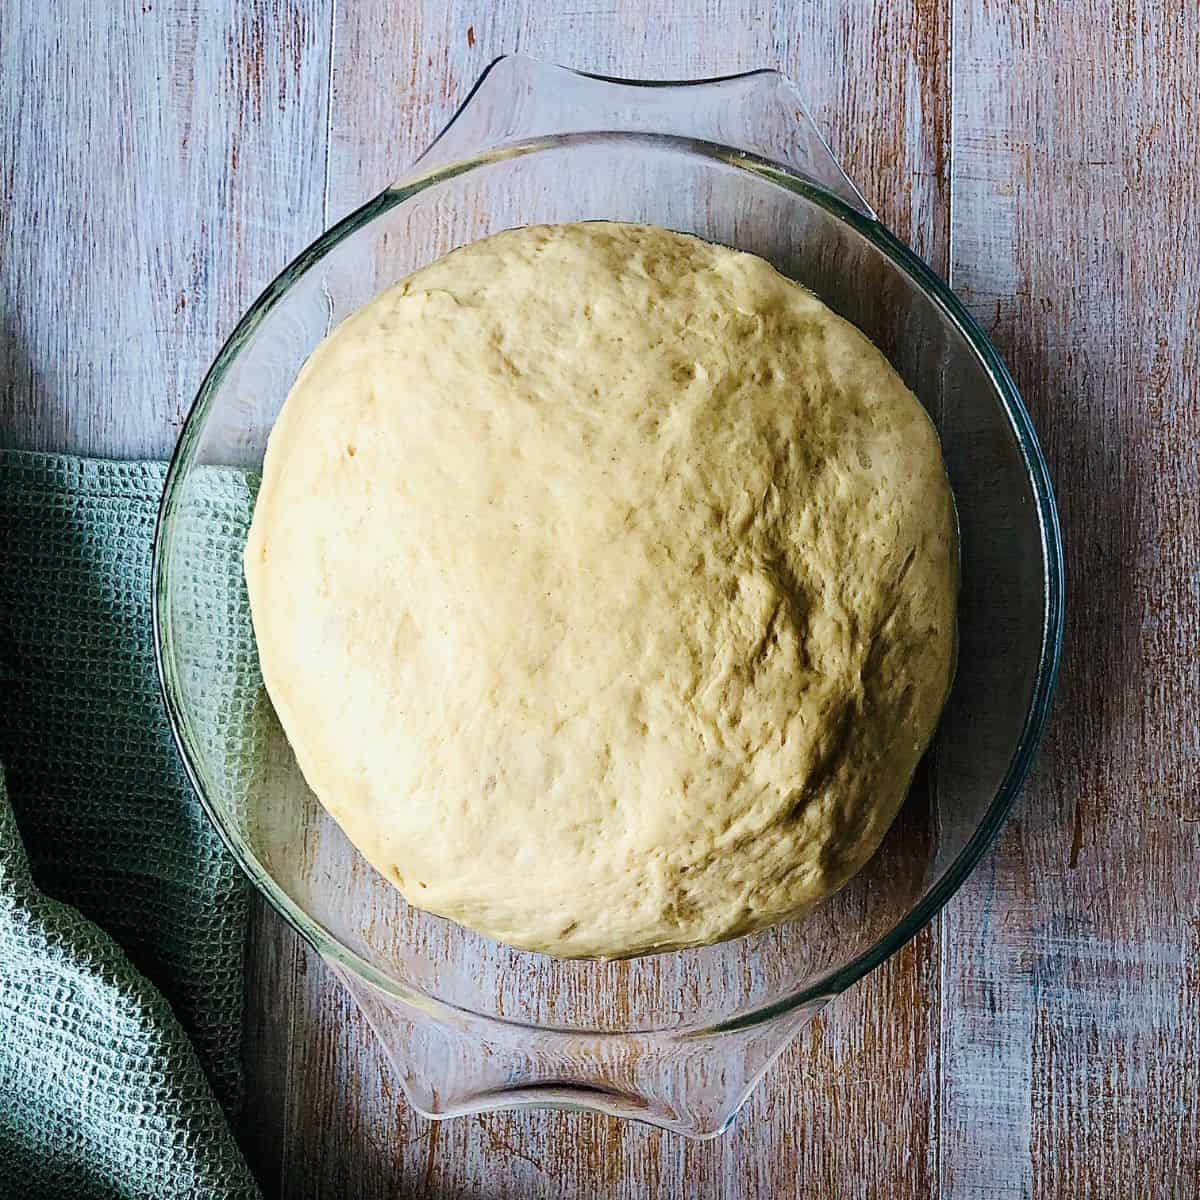 A dough ball for brioche buns in a glass dish after proving and doubling in size.